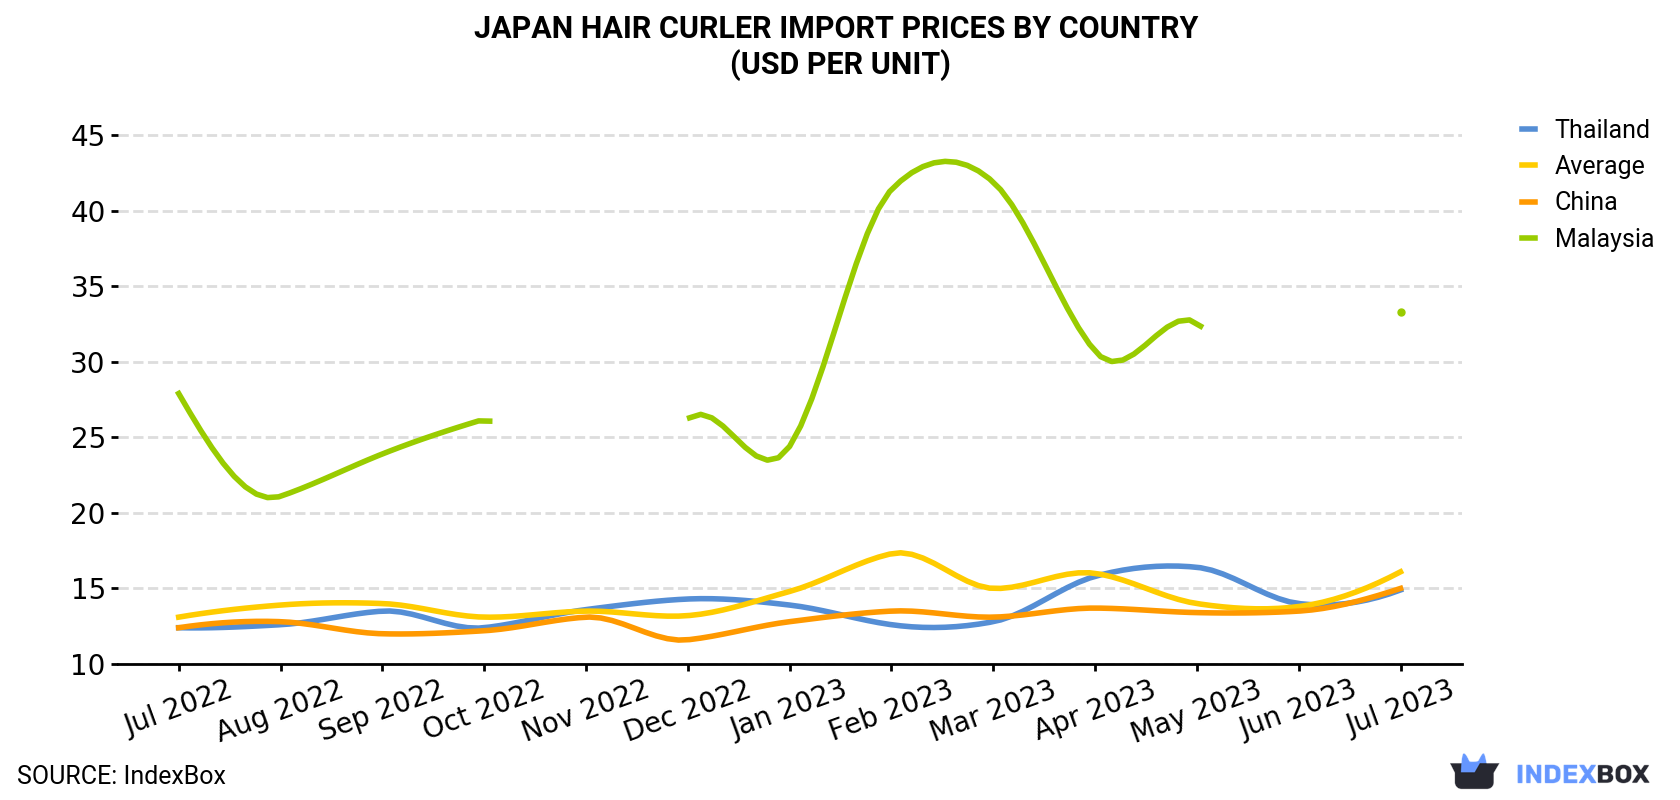 Japan Hair Curler Import Prices By Country (USD Per Unit)